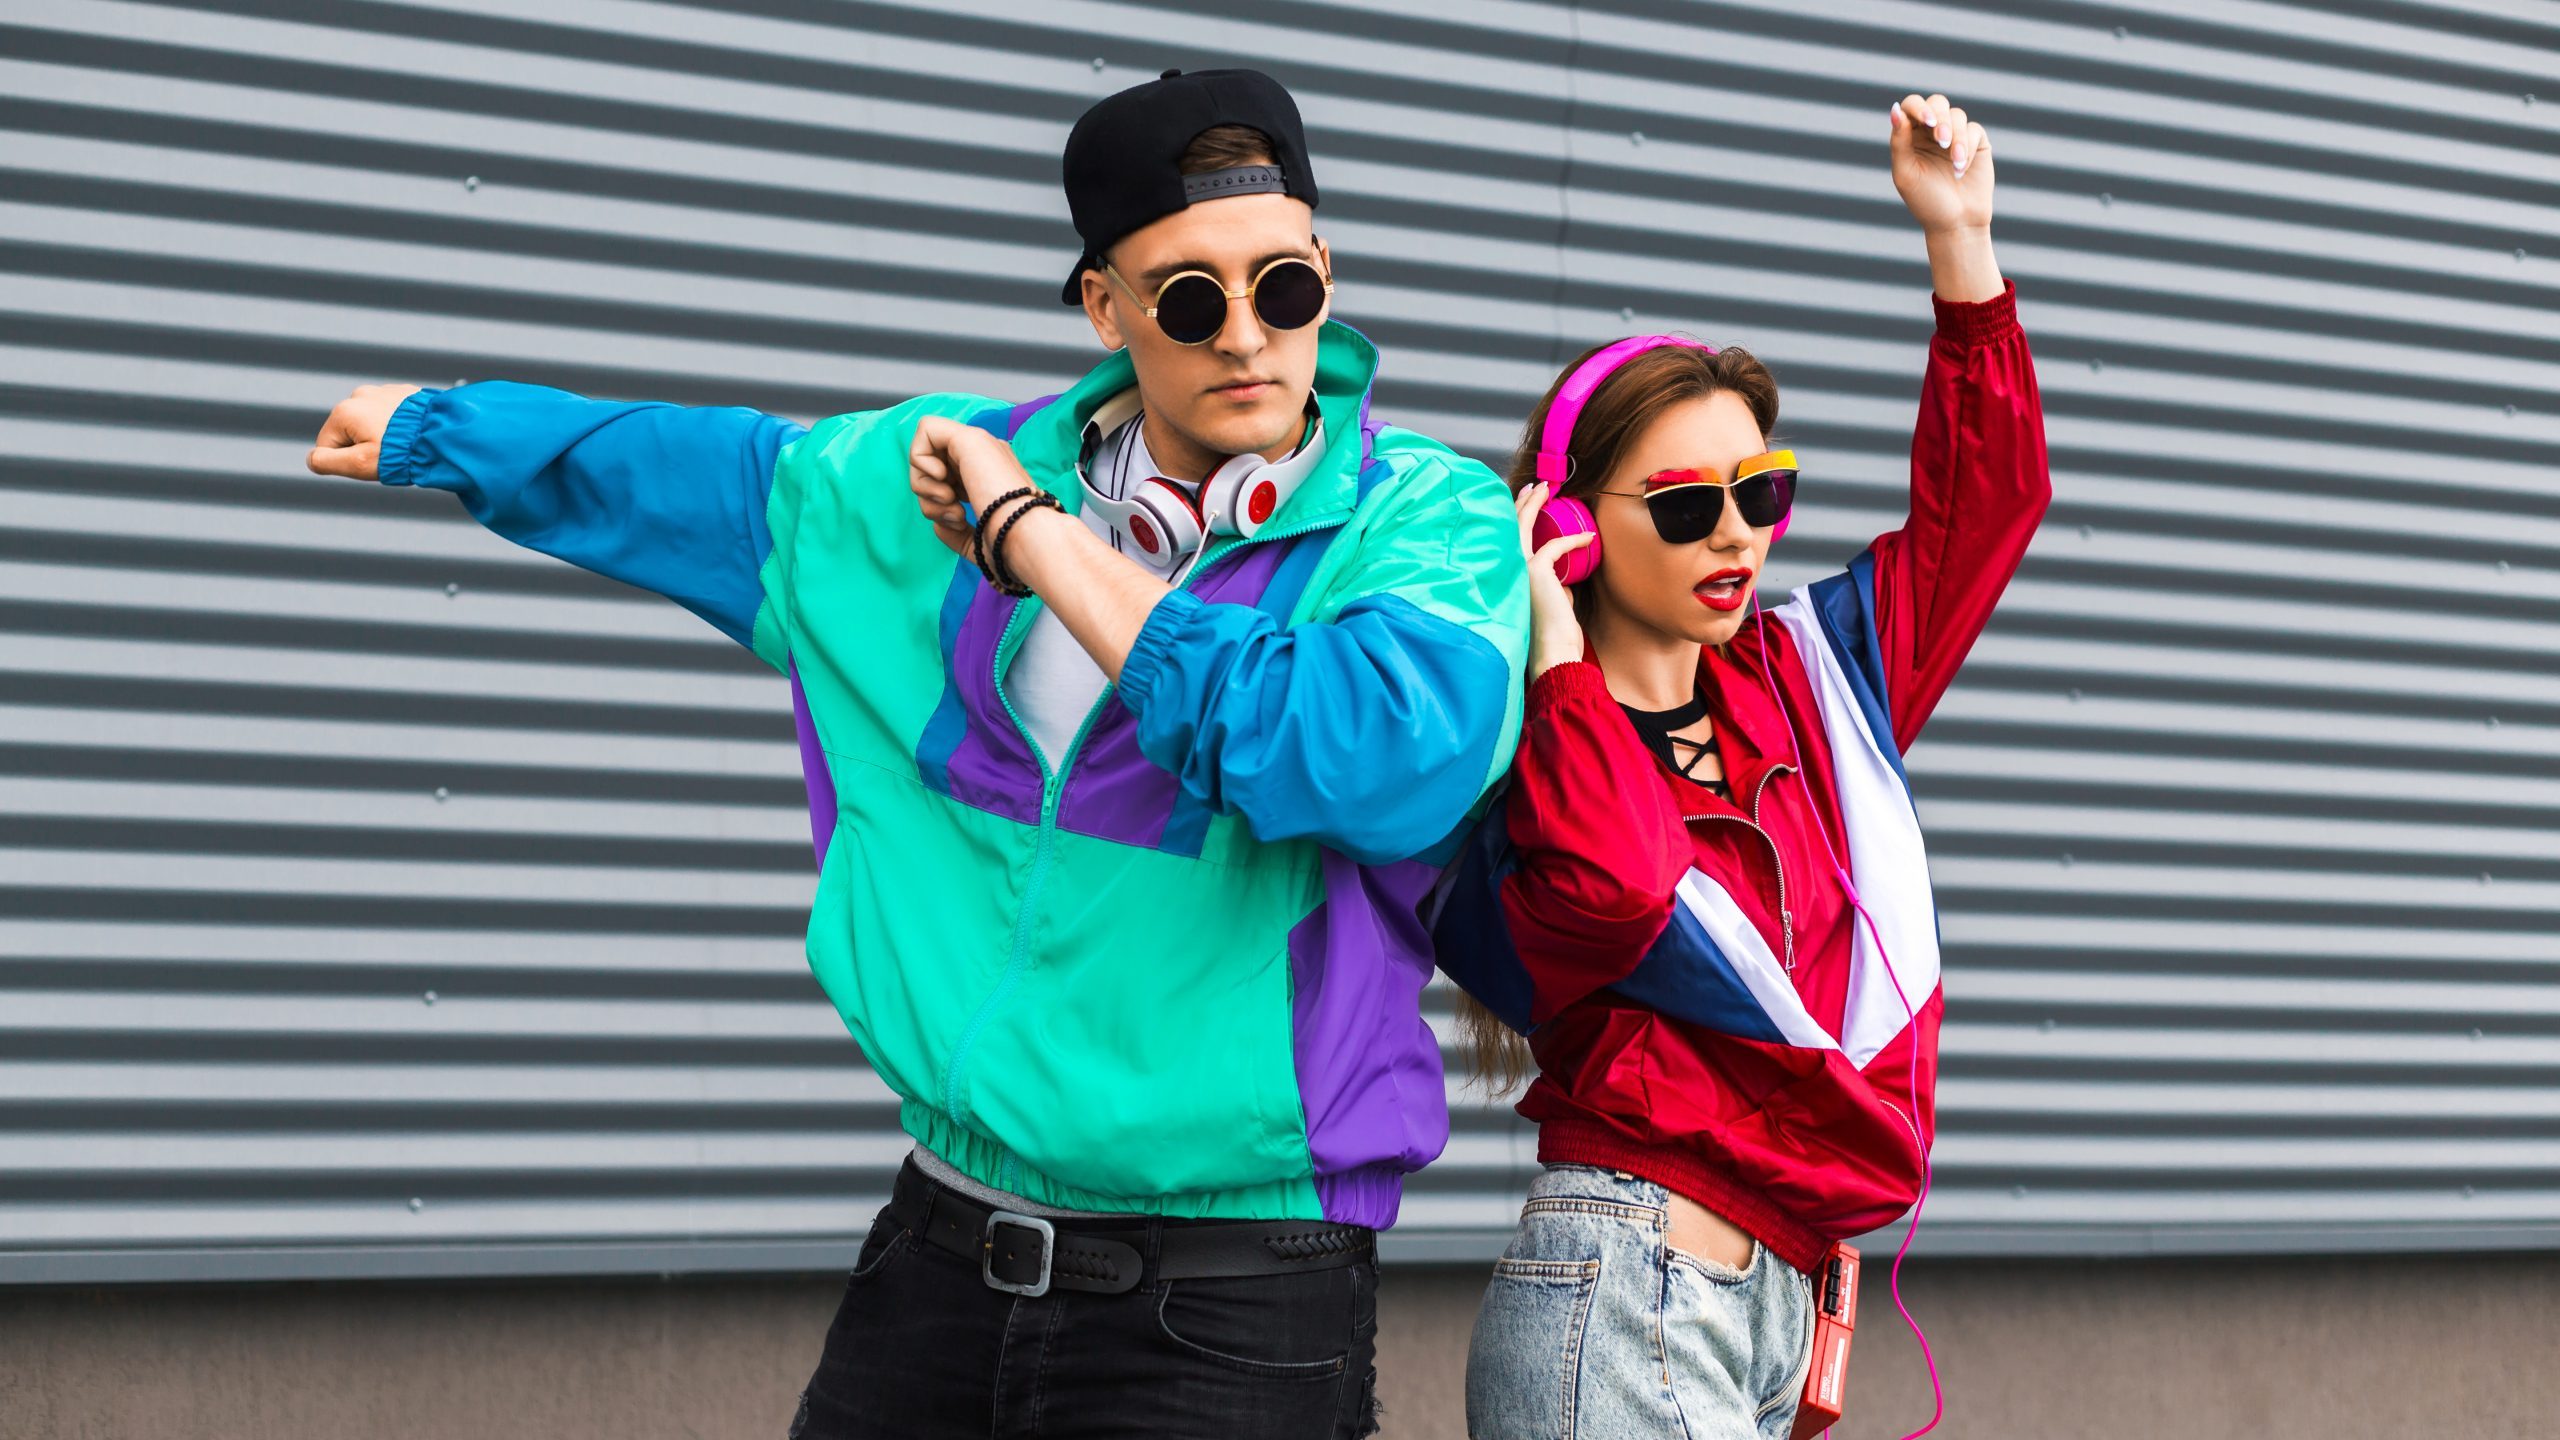 8 ’90s Fashion Trends That Are Making a Comeback